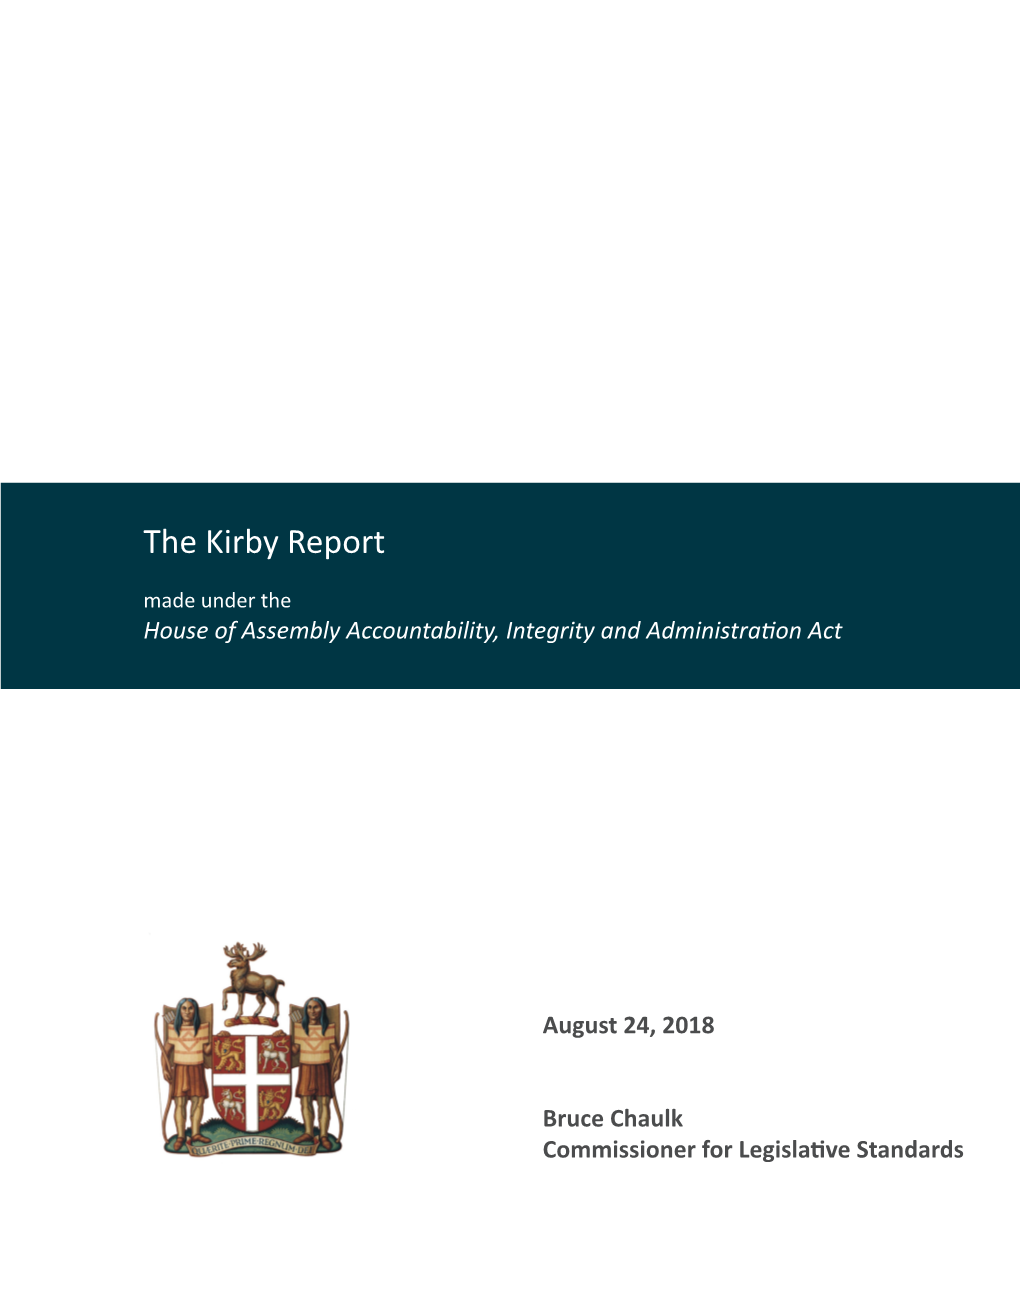 The Kirby Report Made Under the House of Assembly Accountability, Integrity and Administration Act